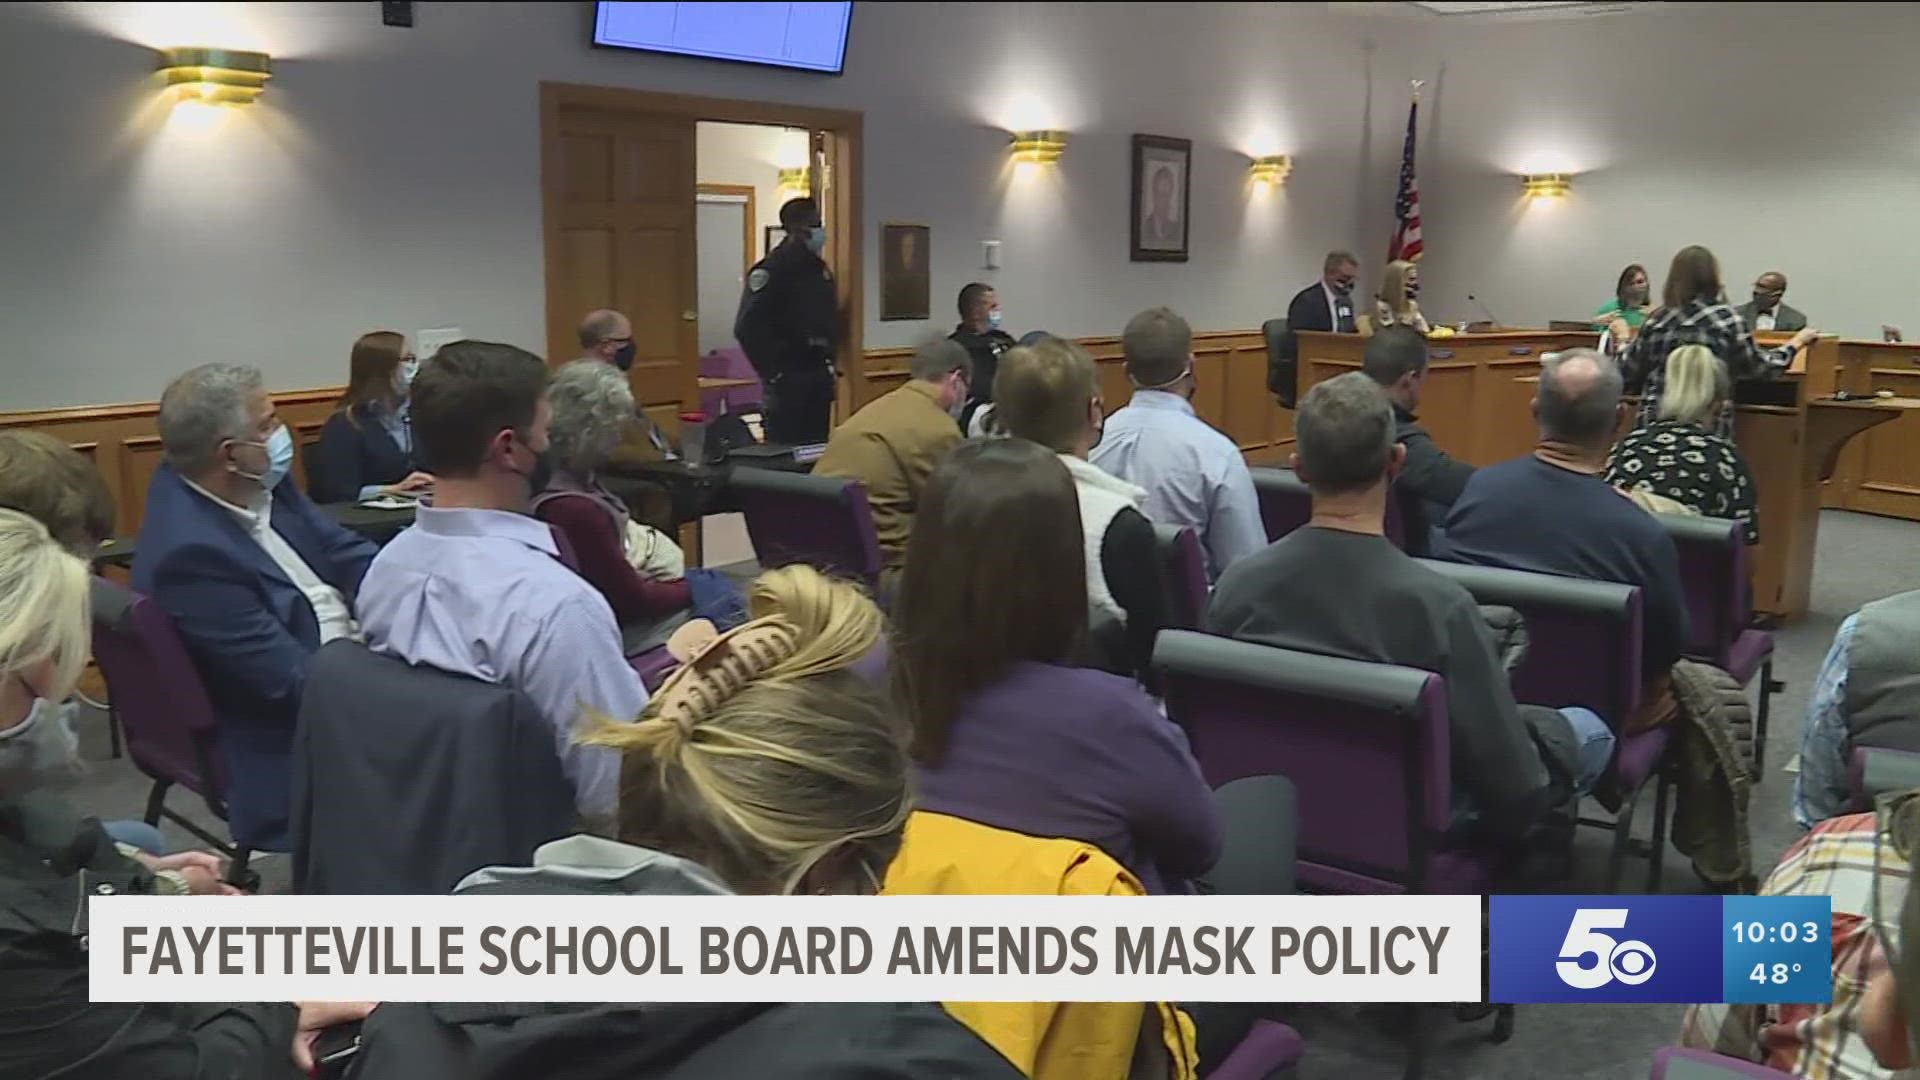 The Fayetteville School Board voted unanimously to amend its current face mask policy, making masks optional for certain grades starting in November.